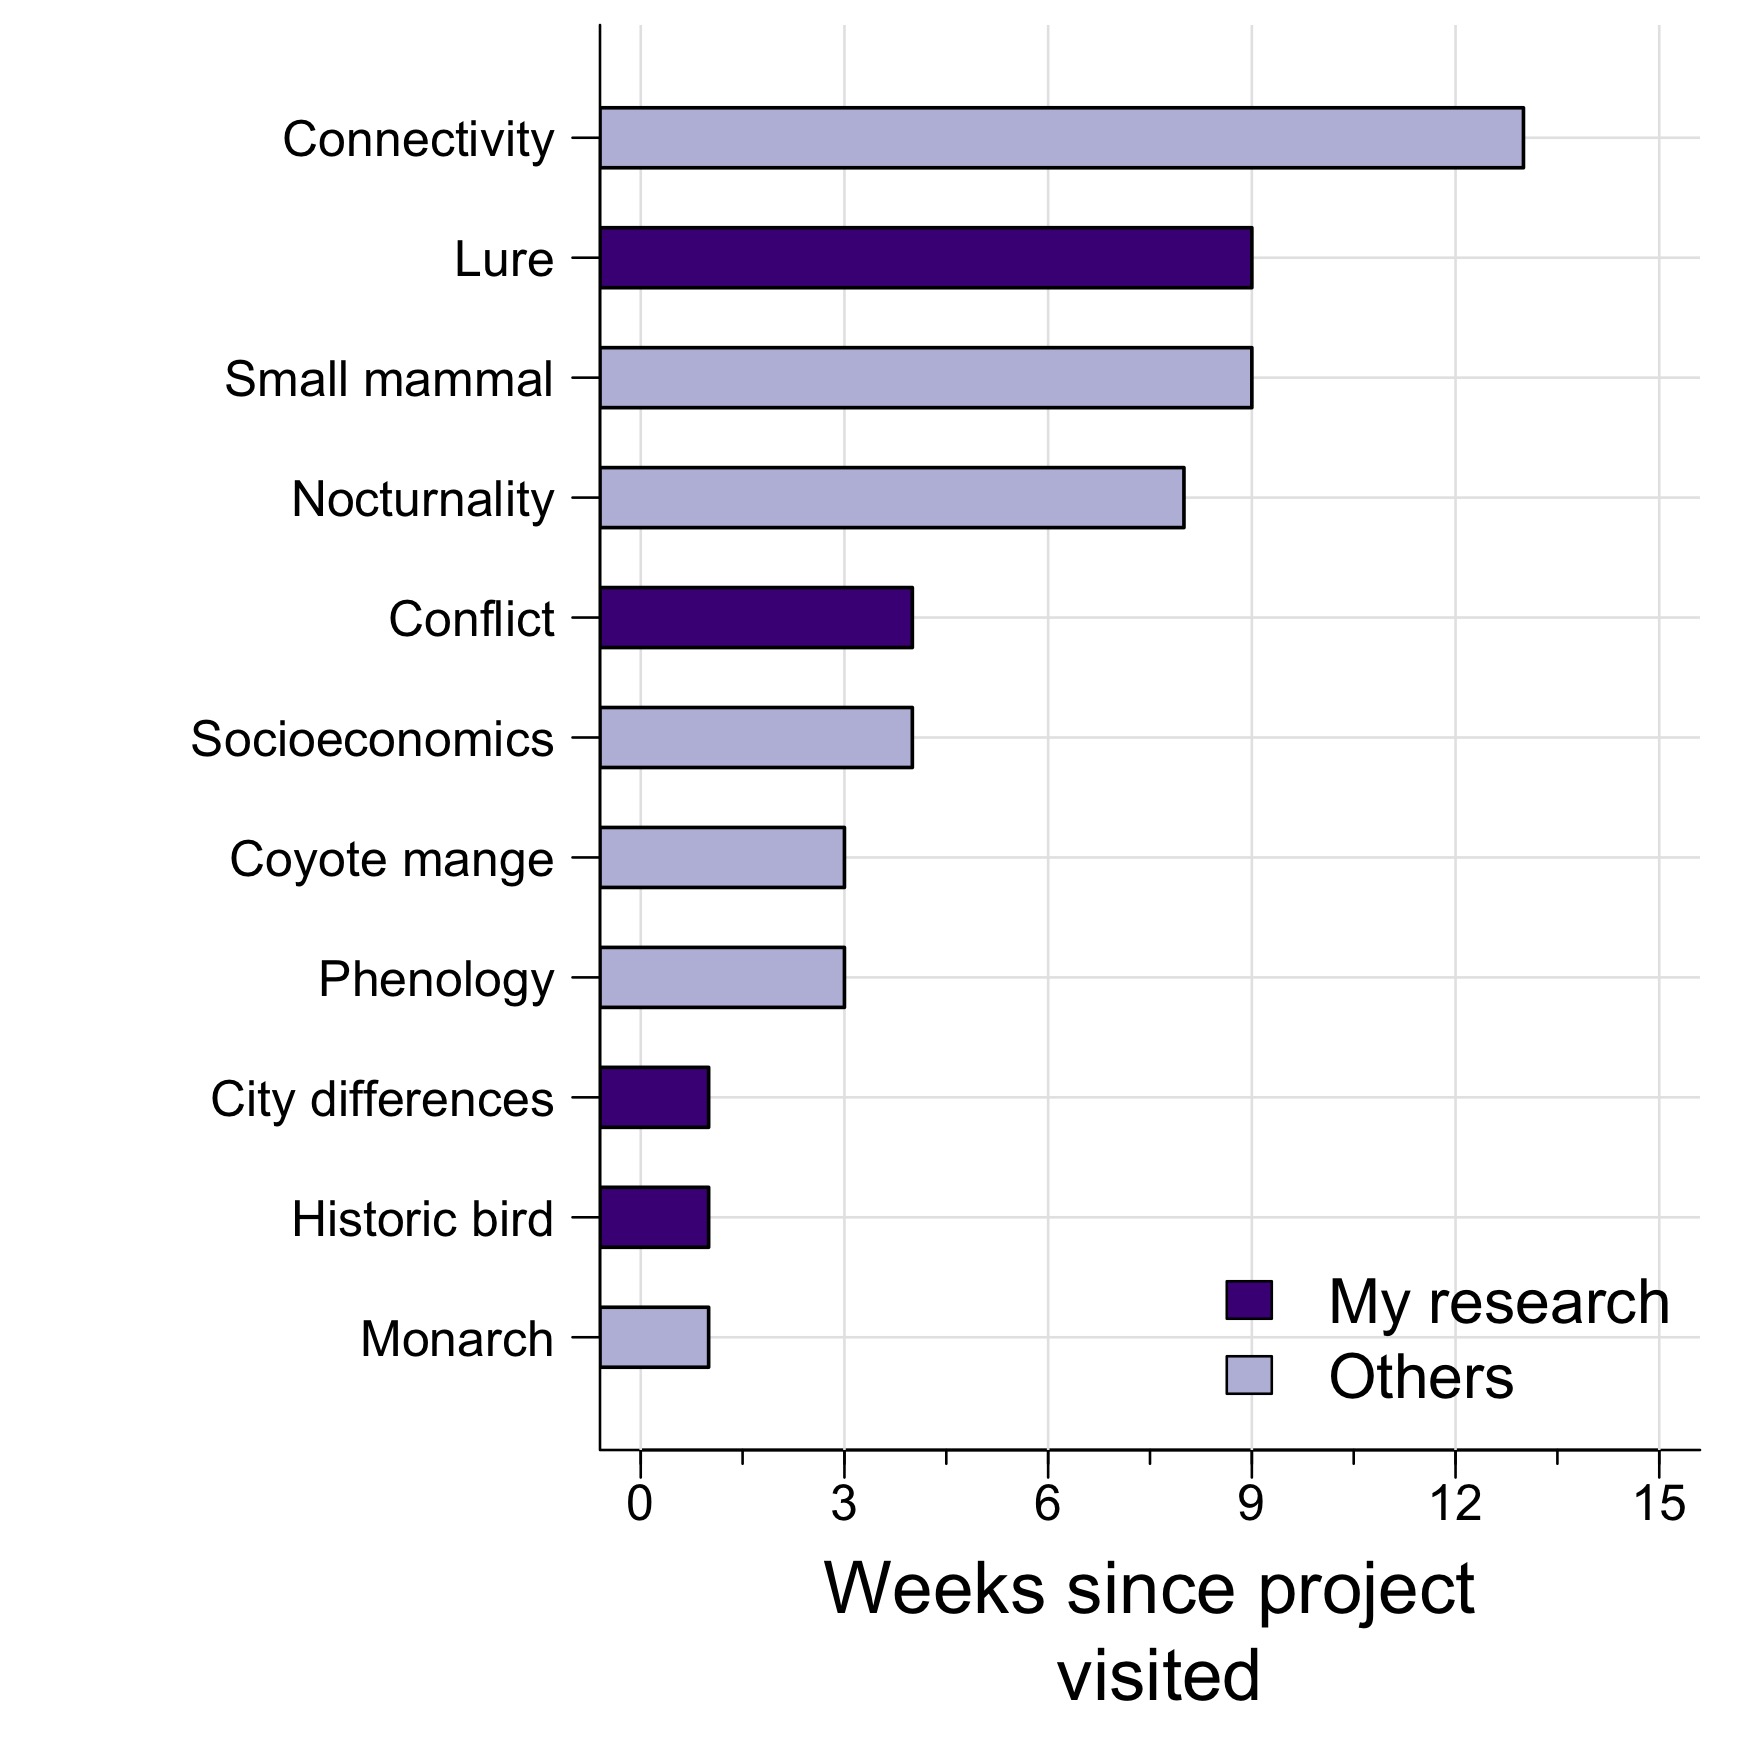 How long has it been since I visited different projects